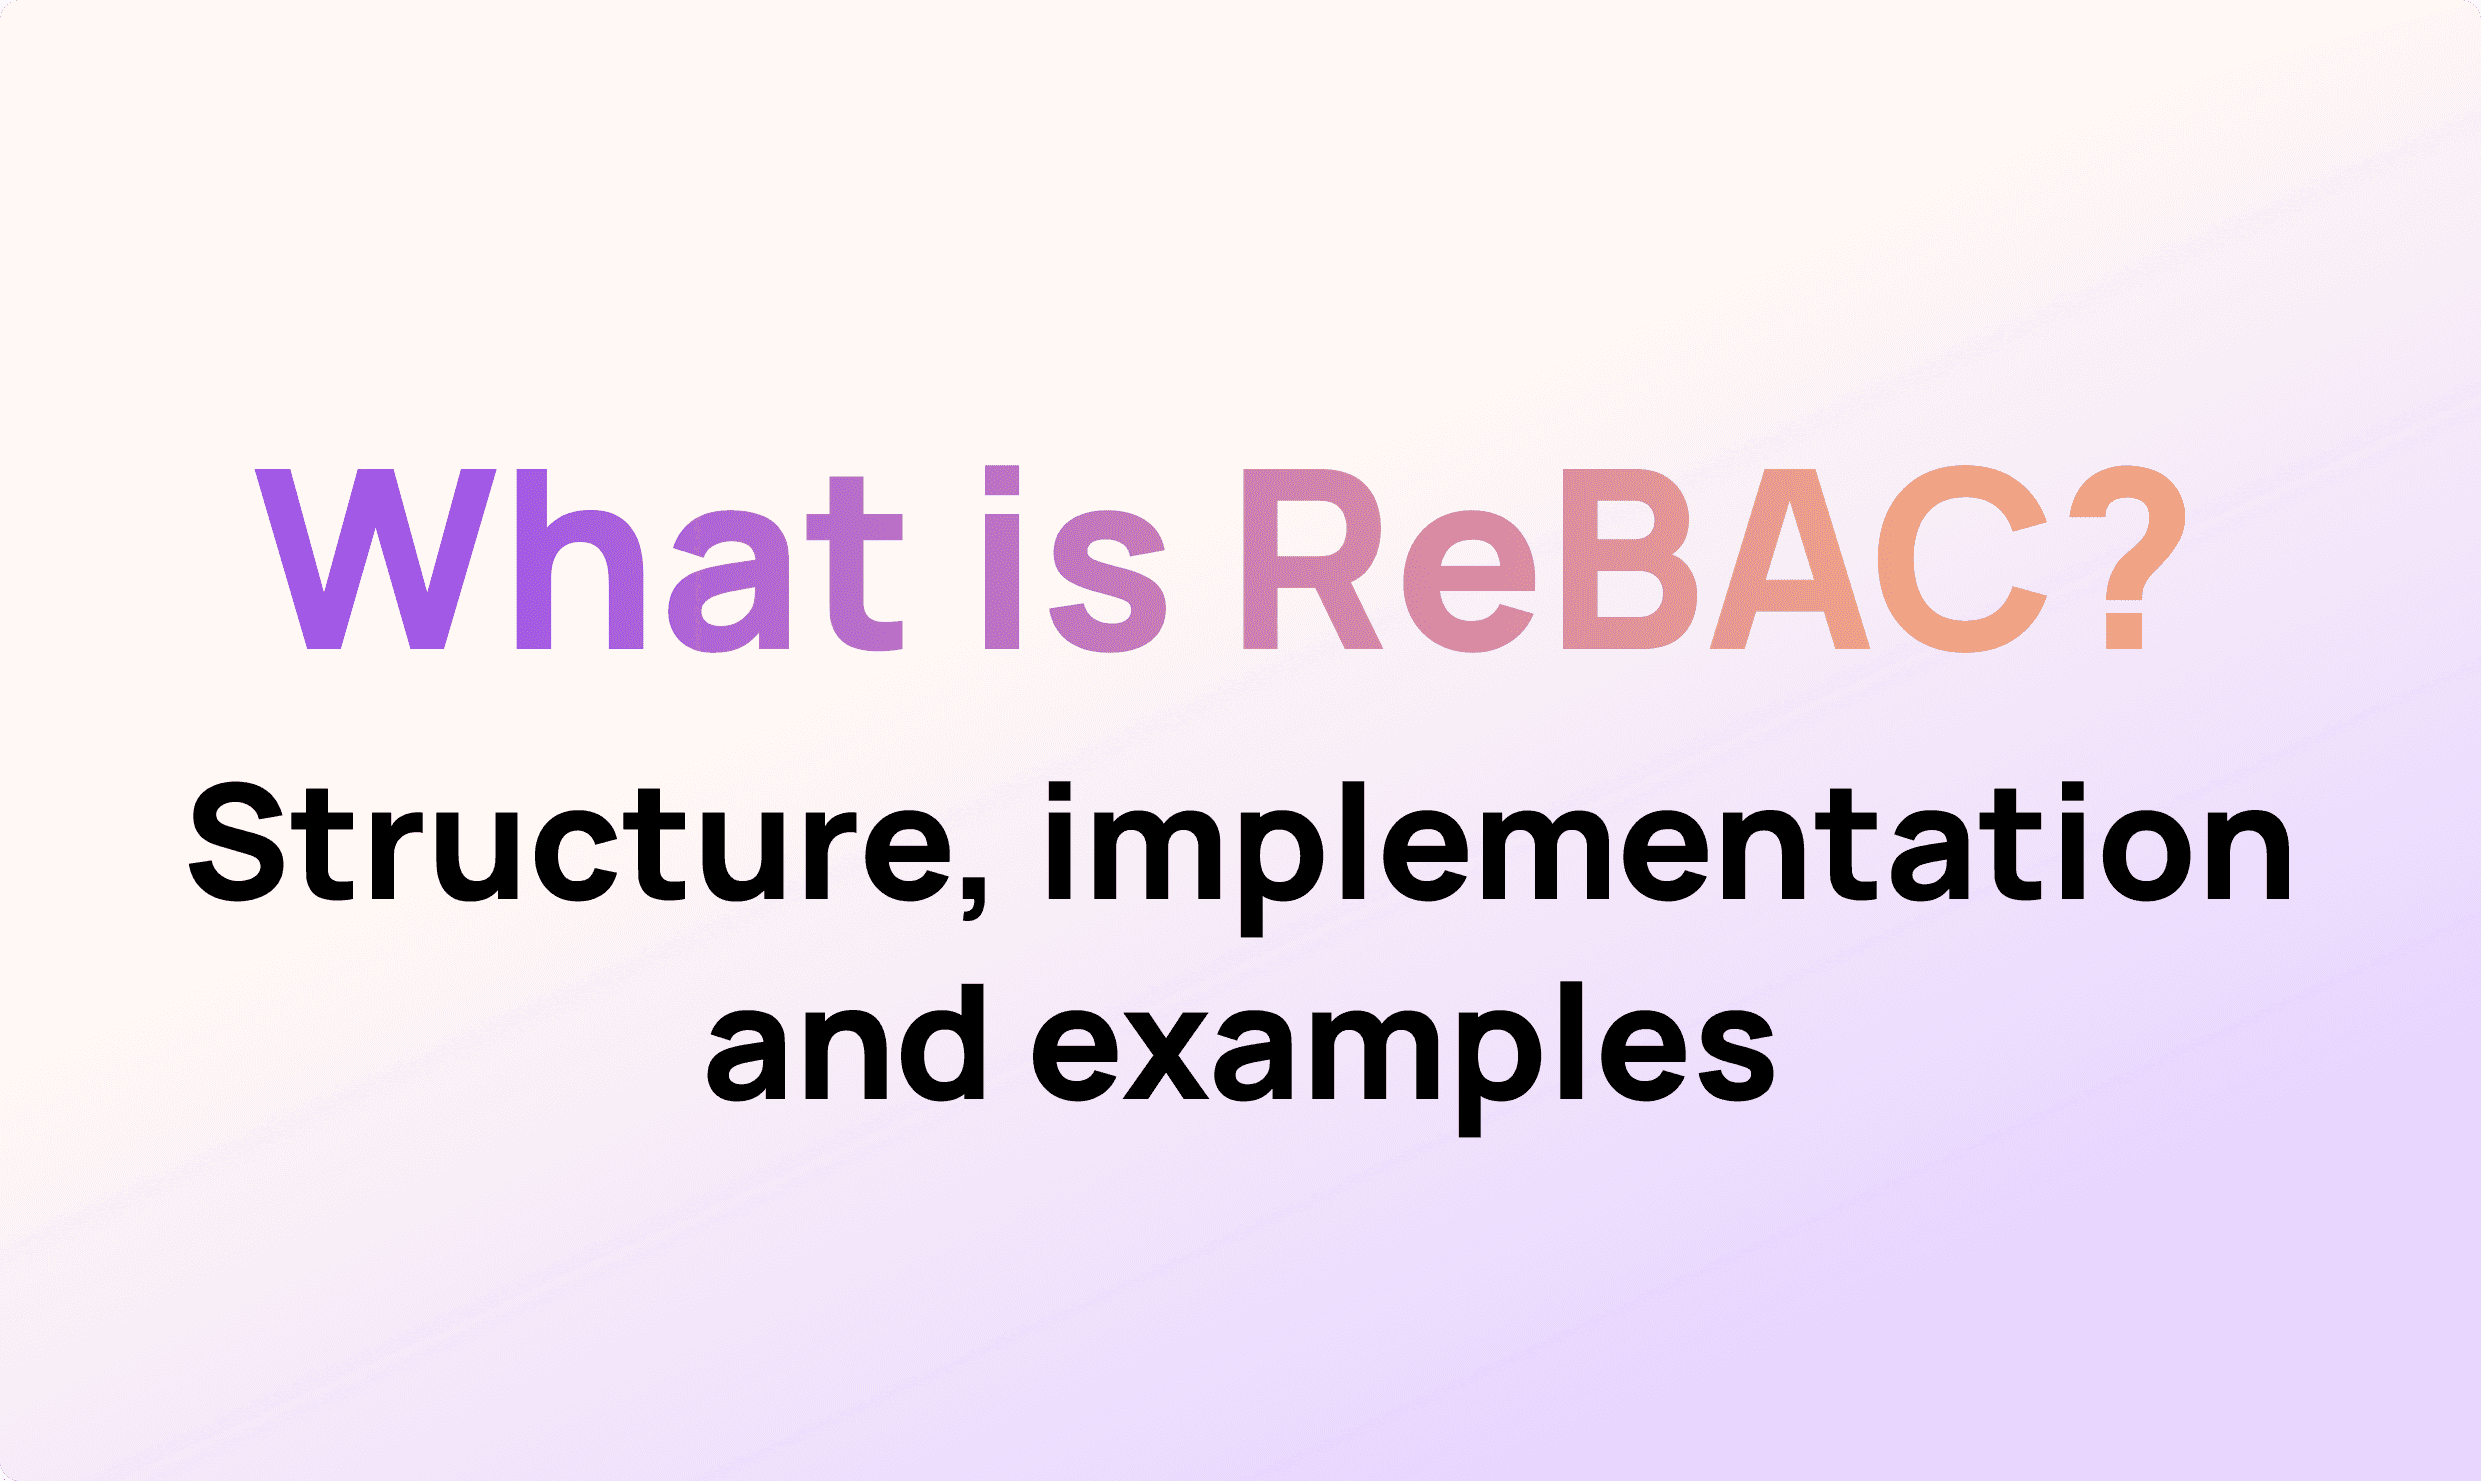 What is Relationship-Based Access Control (ReBAC)?